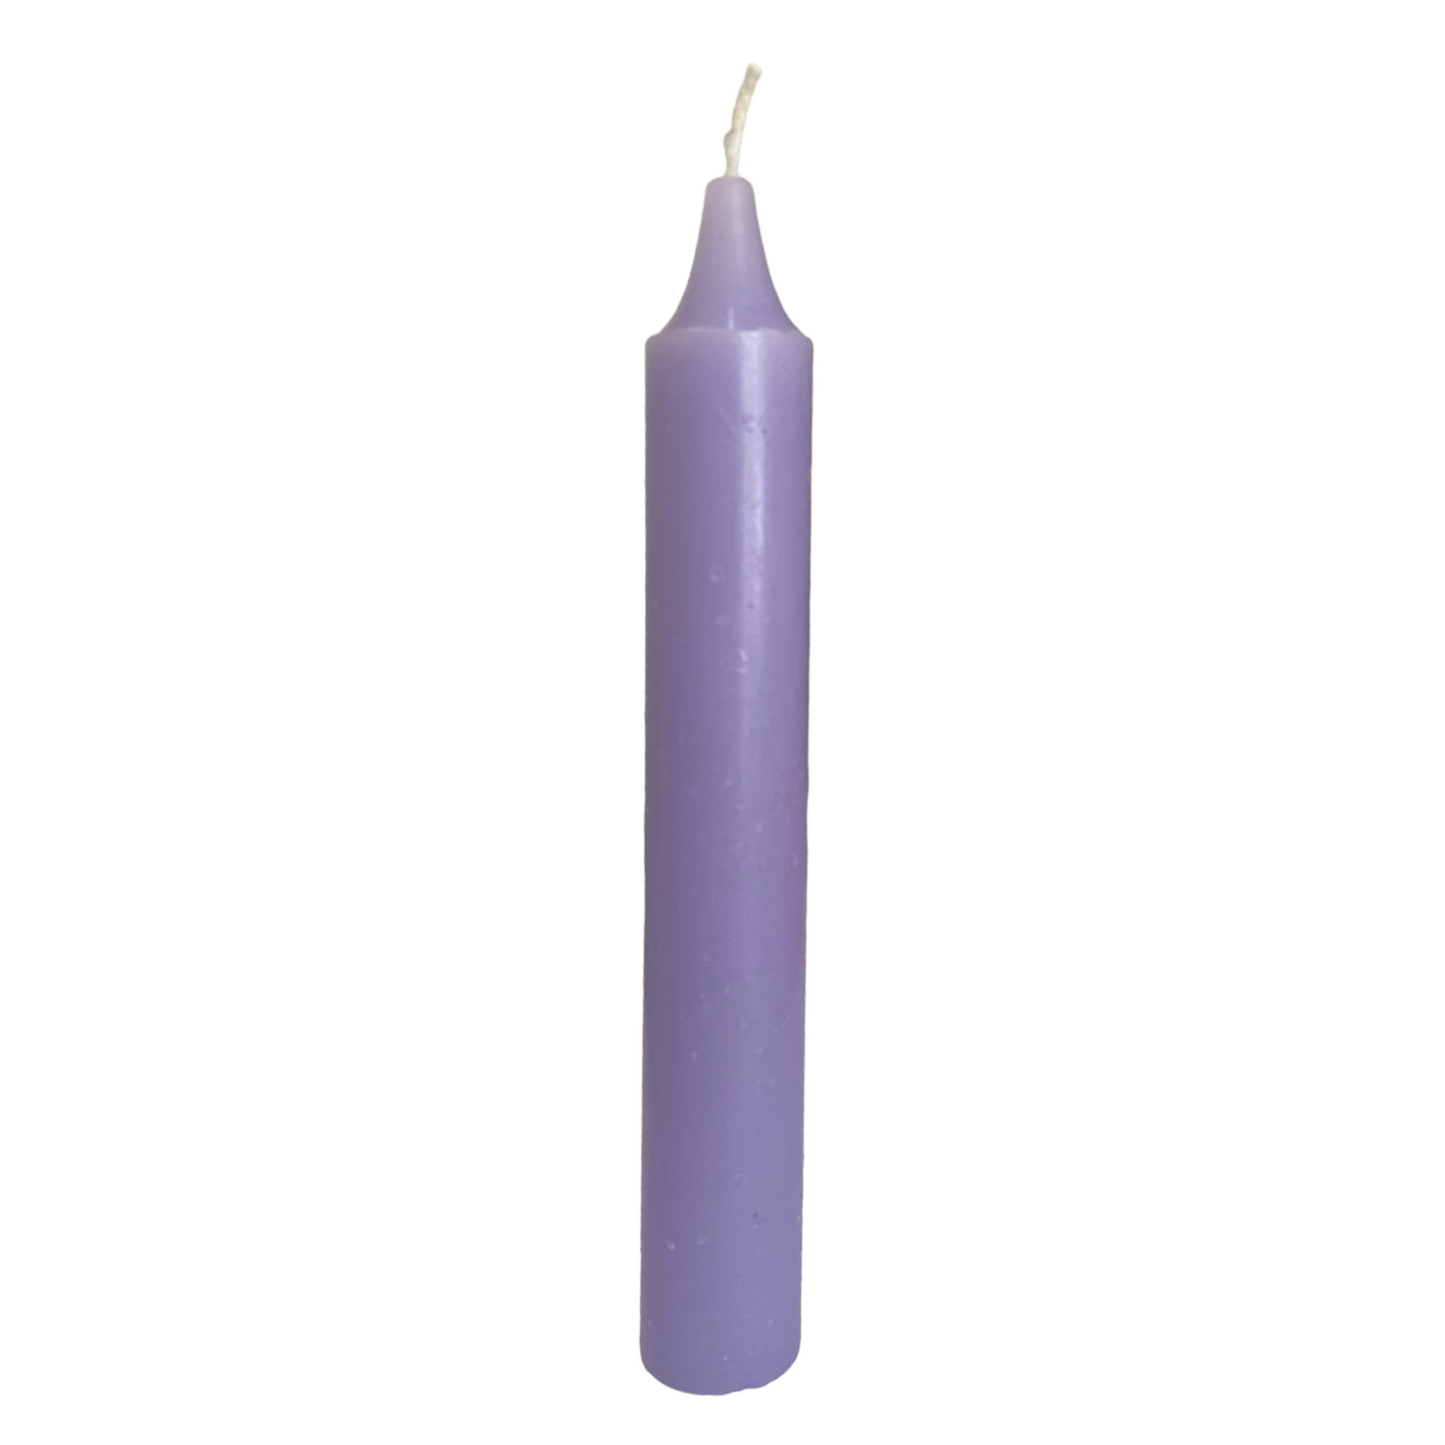 Box of 30 Purple Candles - Solid- 15cm